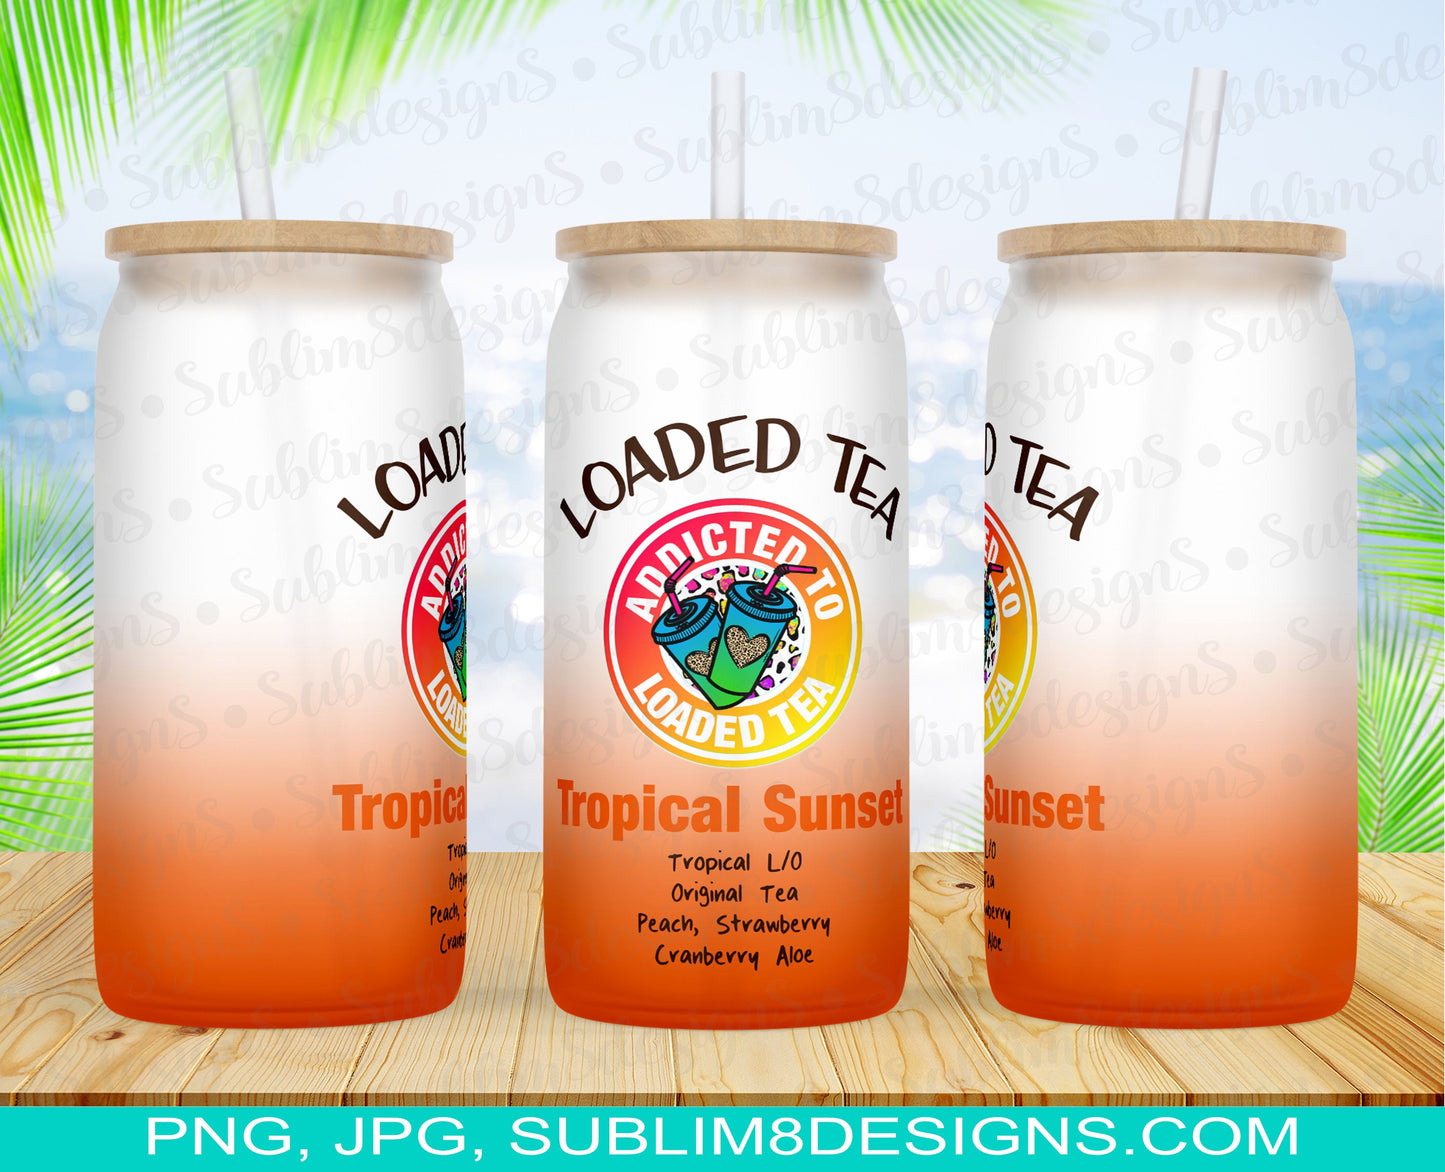 Loaded Tea Addicted To Loaded Tea 5 Flavors 16oz Frosted Glass PNG and JPG ONLY